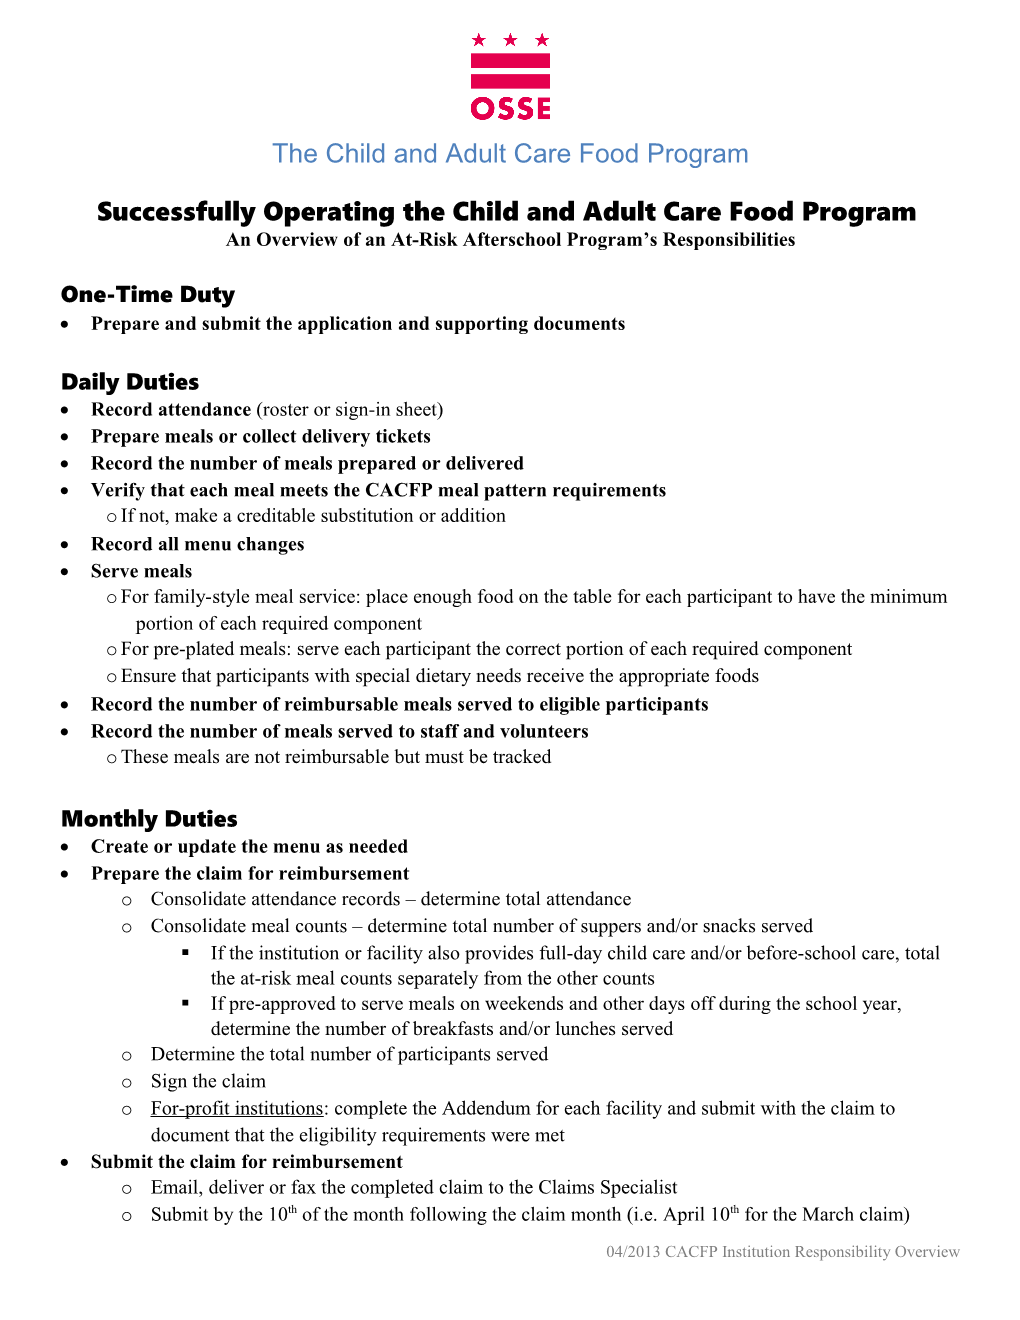 Successfully Operating the Child and Adult Care Food Program